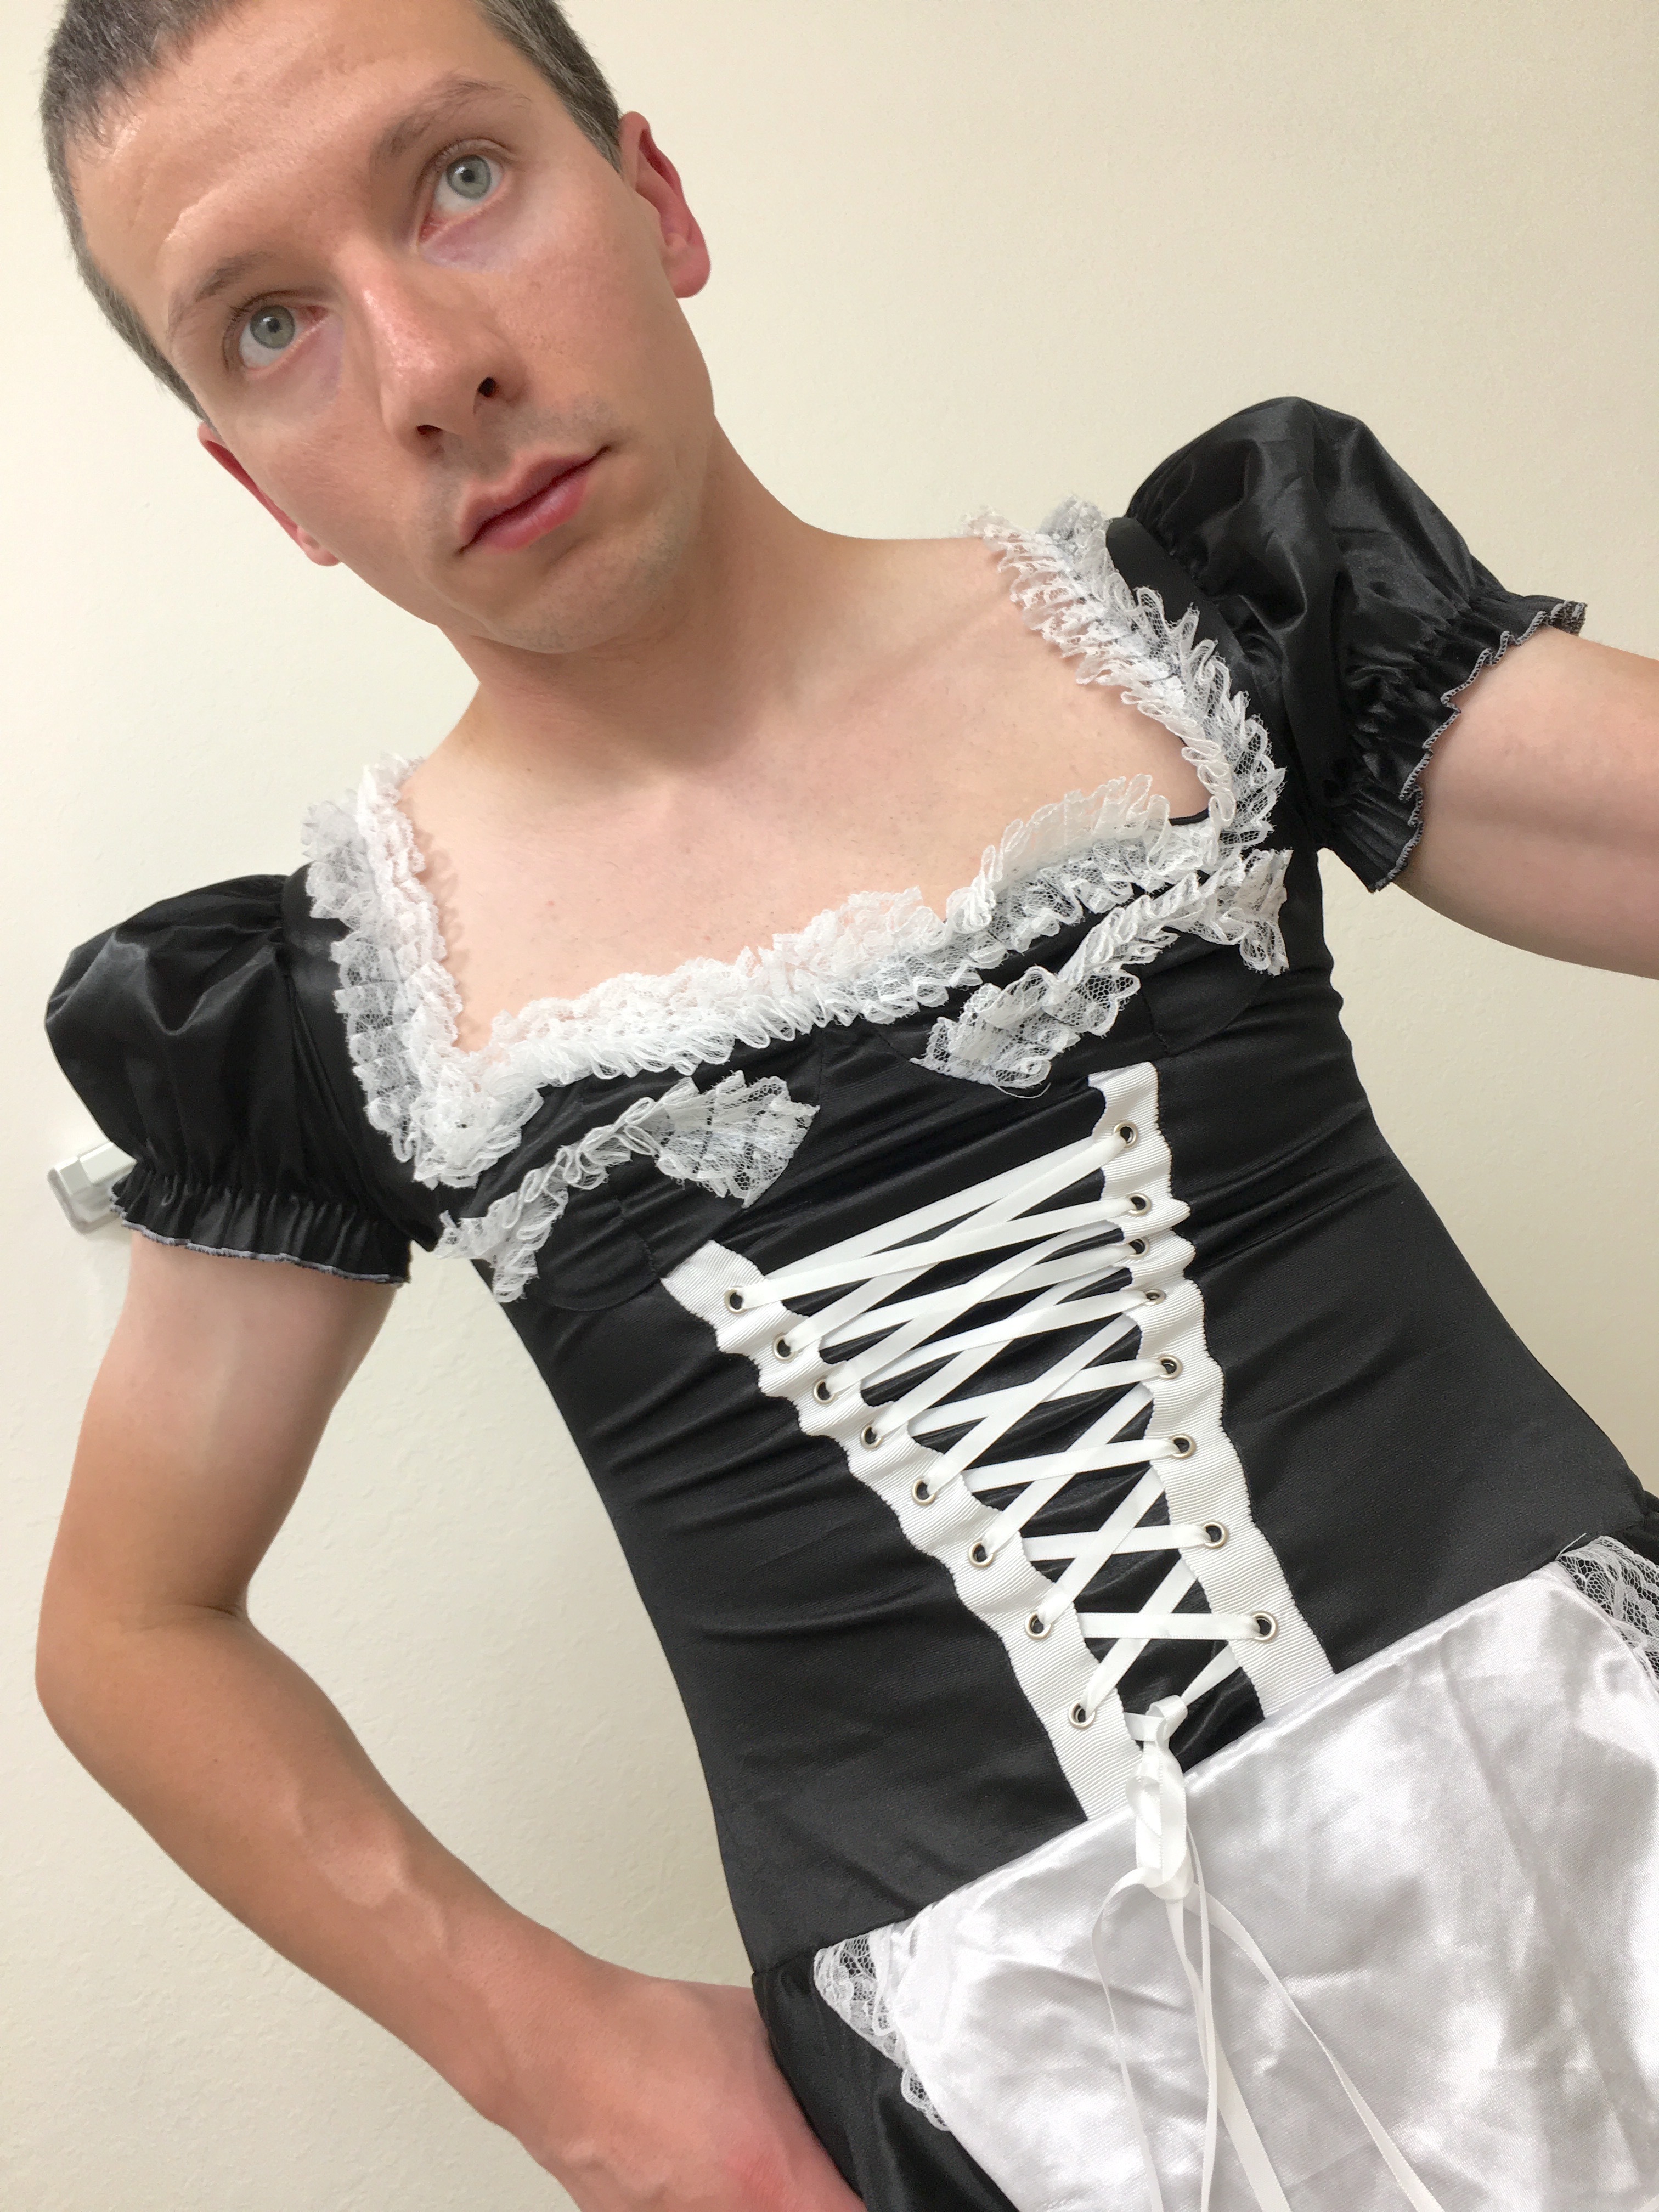 Brian wearing a french maid dress (6/7)